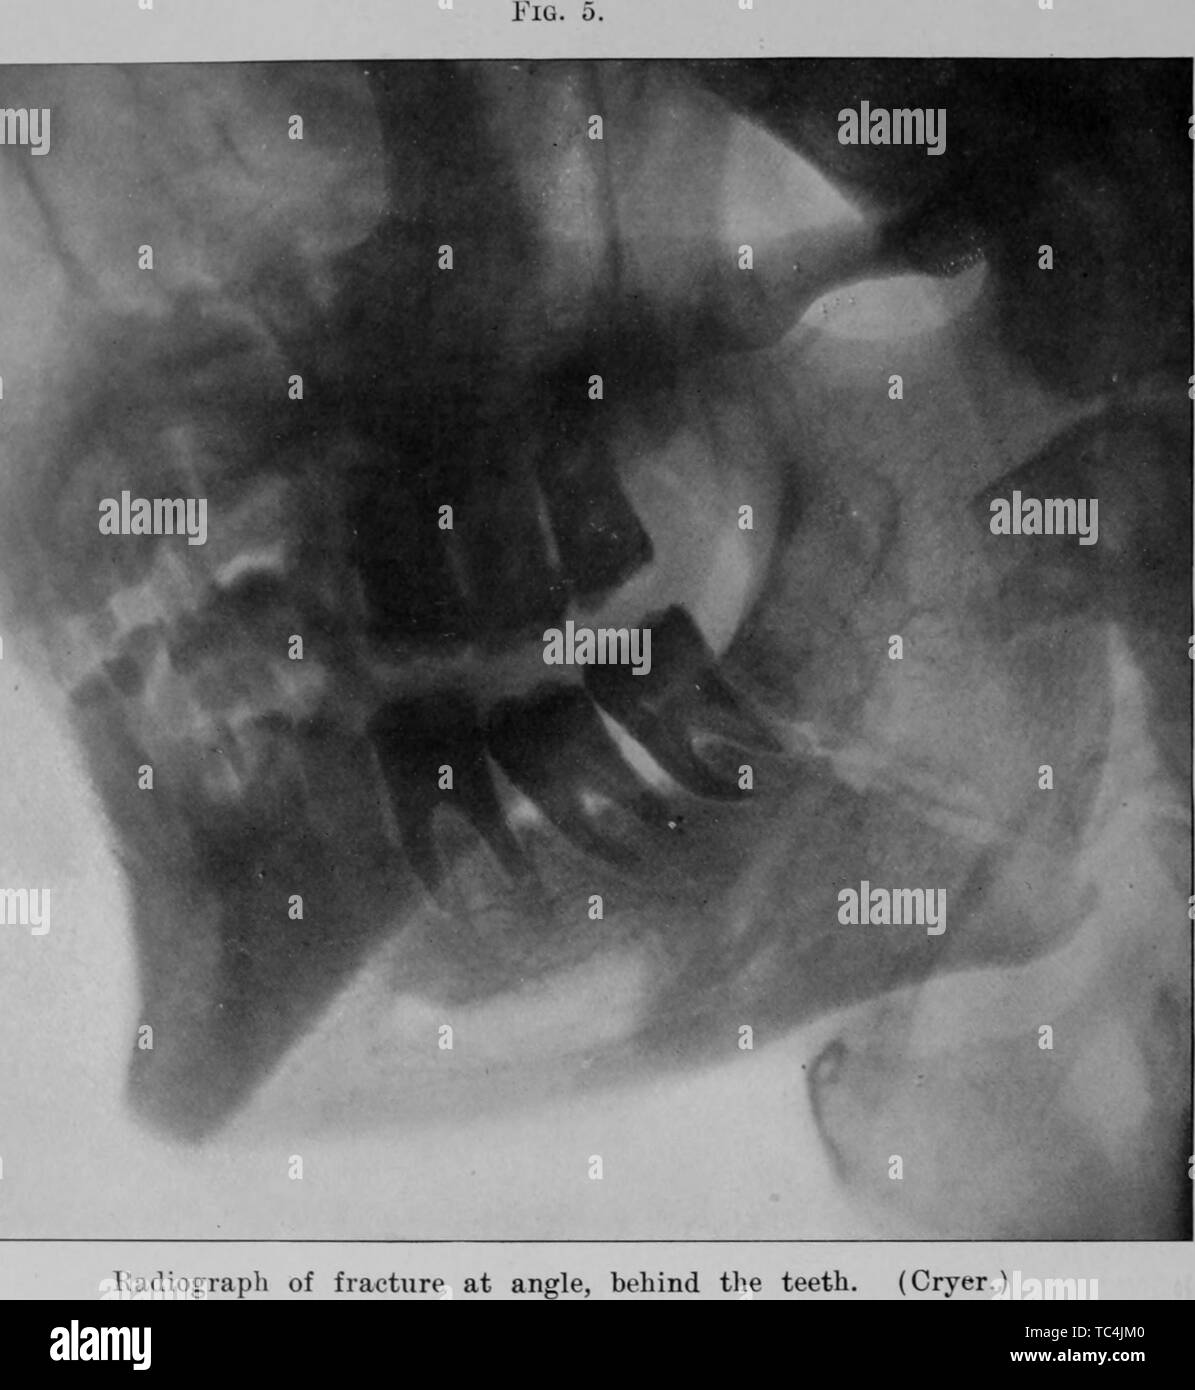 Radiograph of fracture at the angle, behind the teeth, from the book 'The Dental cosmos' by John Hugh McQuillen, George Jacob Ziegler, James William White, Edward Cameron Kirk, and Lovick Pierce Anthony, 1914. Courtesy Internet Archive. () Stock Photo